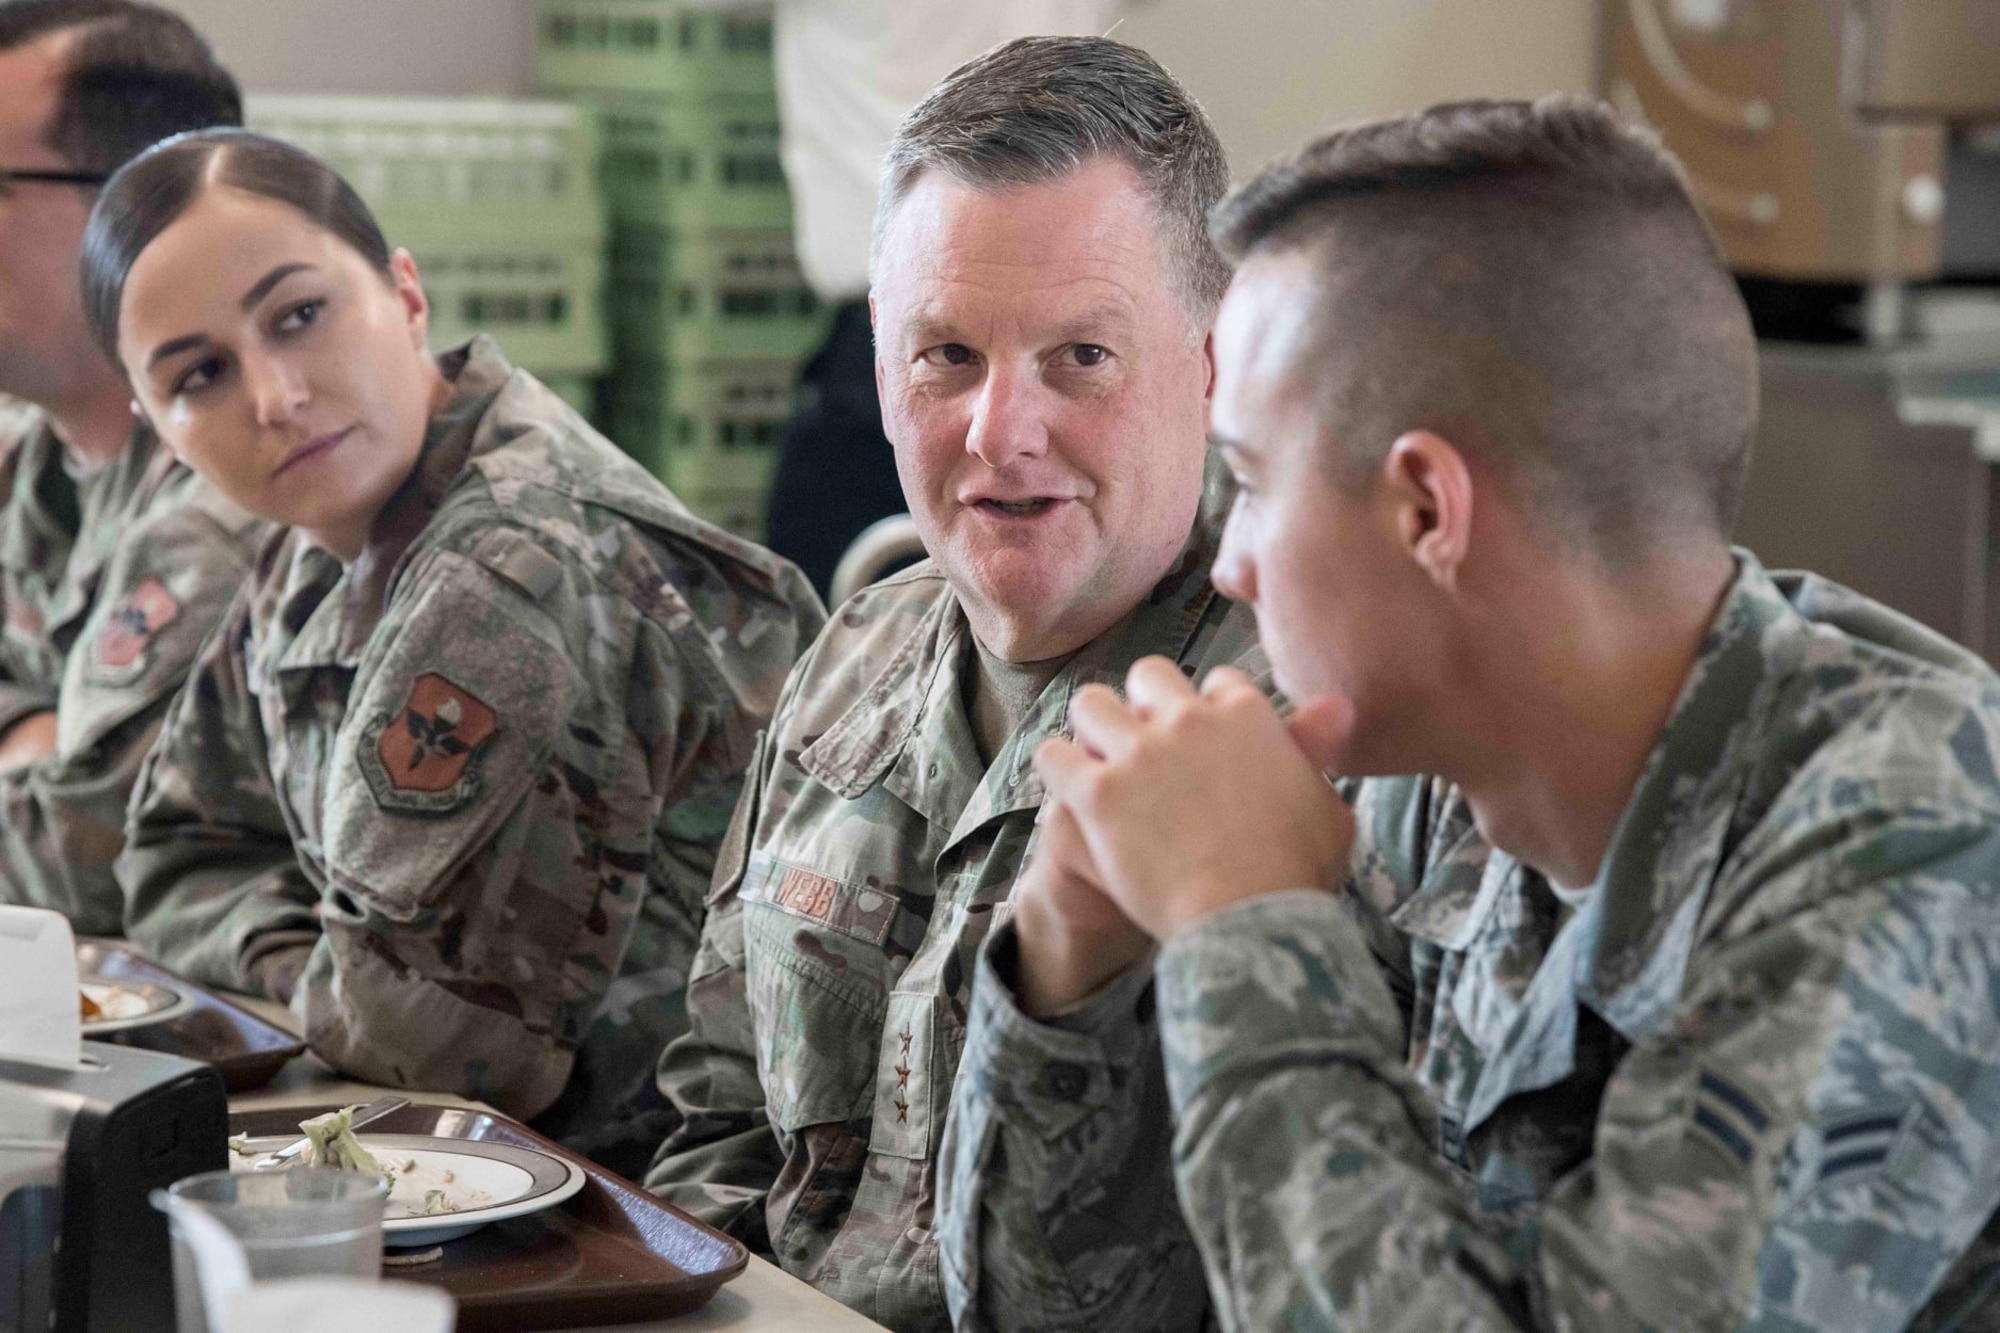 U.S. Air Force Lt. Gen. Brad Webb, commander of Air Education and Training Command, speaks to junior members of the 502nd Air Base Wing during lunch at the Slagel dinning facility, Sept. 26, 2019, at Joint Base San Antonio-Fort Sam Houston, Texas. The AETC command team visited some of the 502nd ABW’s 49 installation support functions, and 266 mission partners that enable the largest Joint Base in DoD to support 80,000 personnel and local community of more than 250,000 retirees. (U.S. Air Force photo by Sean M. Worrell)